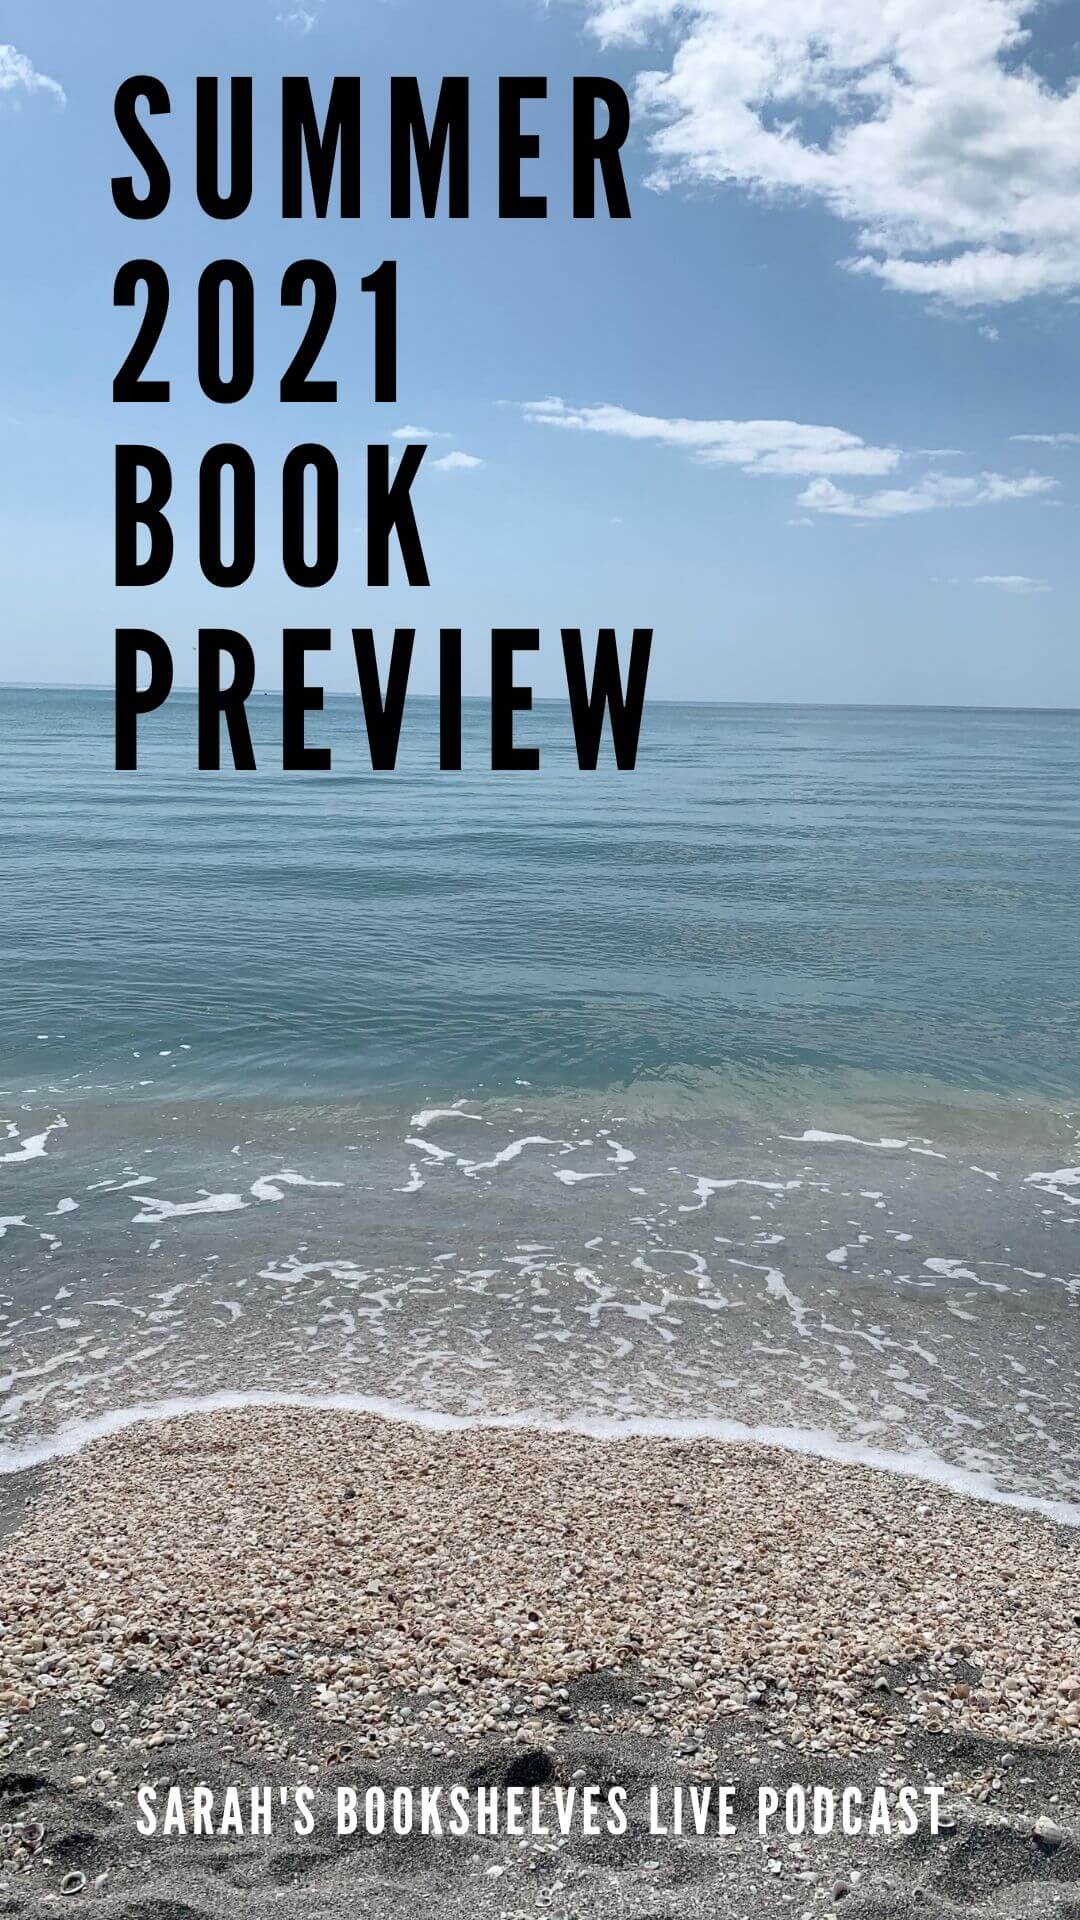 Summer 2021 Book Preview